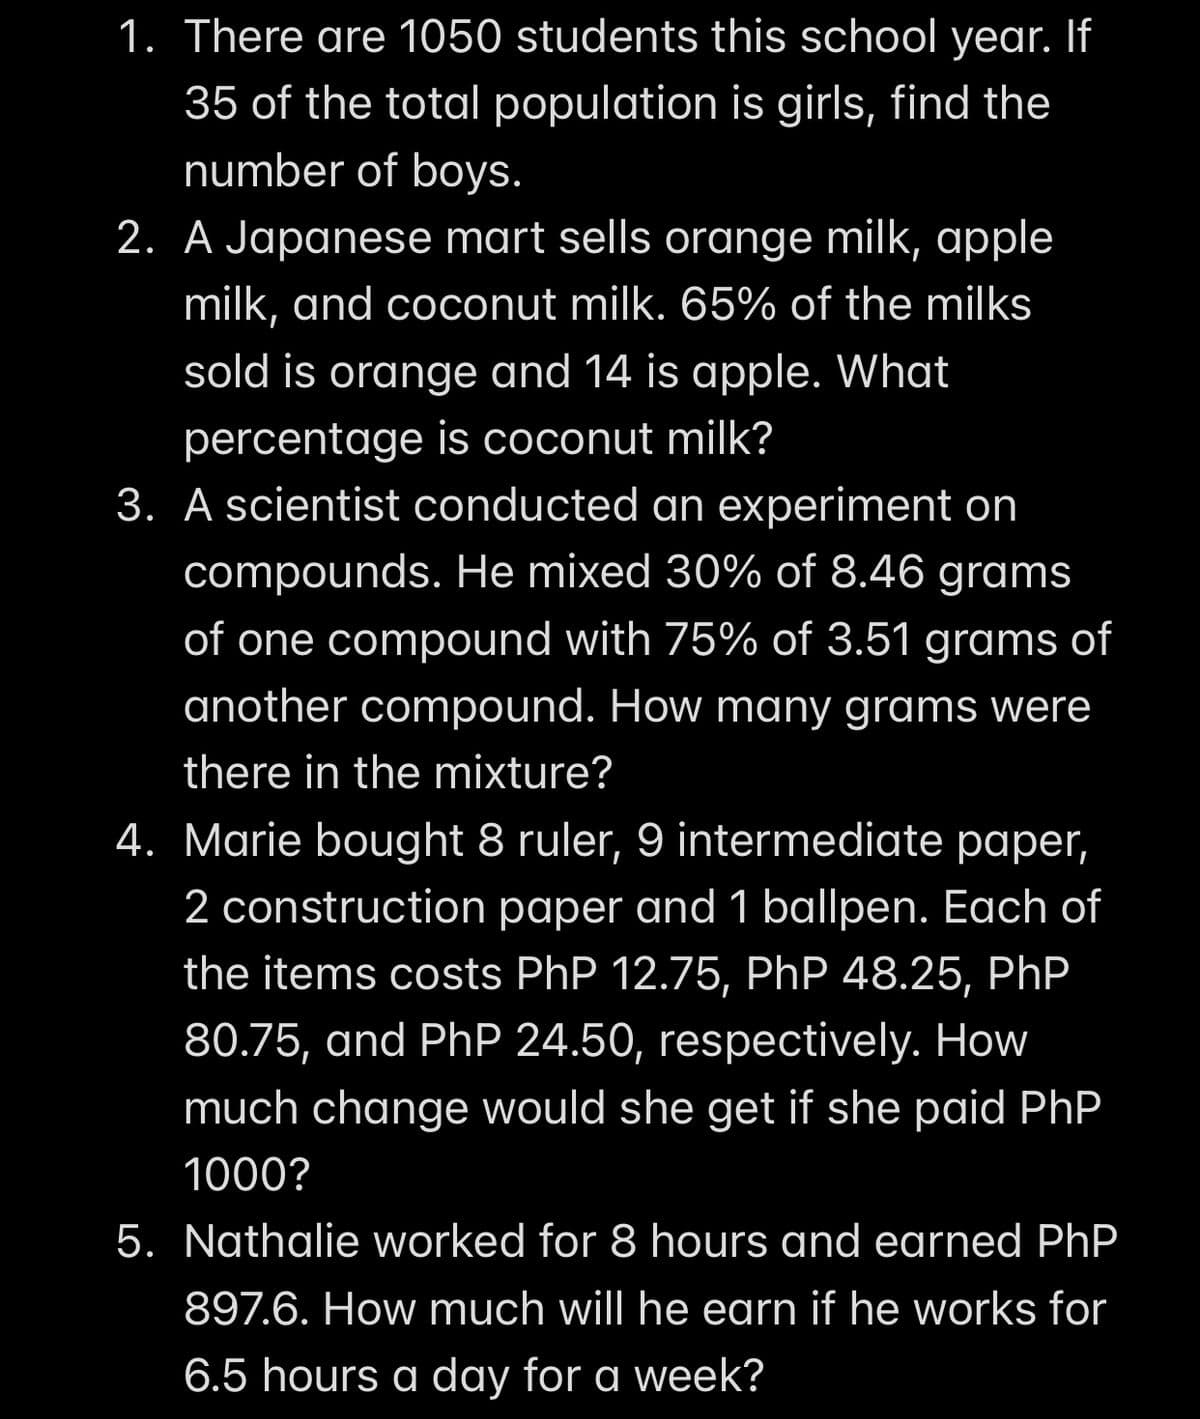 1. There are 1050 students this school year. If
35 of the total population is girls, find the
number of boys.
2. A Japanese mart sells orange milk, apple
milk, and coconut milk. 65% of the milks
sold is orange and 14 is apple. What
percentage is coconut milk?
3. A scientist conducted an experiment on
compounds. He mixed 30% of 8.46 grams
of one compound with 75% of 3.51 grams of
another compound. How many grams were
there in the mixture?
4. Marie bought 8 ruler, 9 intermediate paper,
2 construction paper and 1 ballpen. Each of
the items costs PhP 12.75, PhP 48.25, PhP
80.75, and PhP 24.50, respectively. How
much change would she get if she paid PhP.
1000?
5. Nathalie worked for 8 hours and earned PhP
897.6. How much will he earn if he works for
6.5 hours a day for a week?
